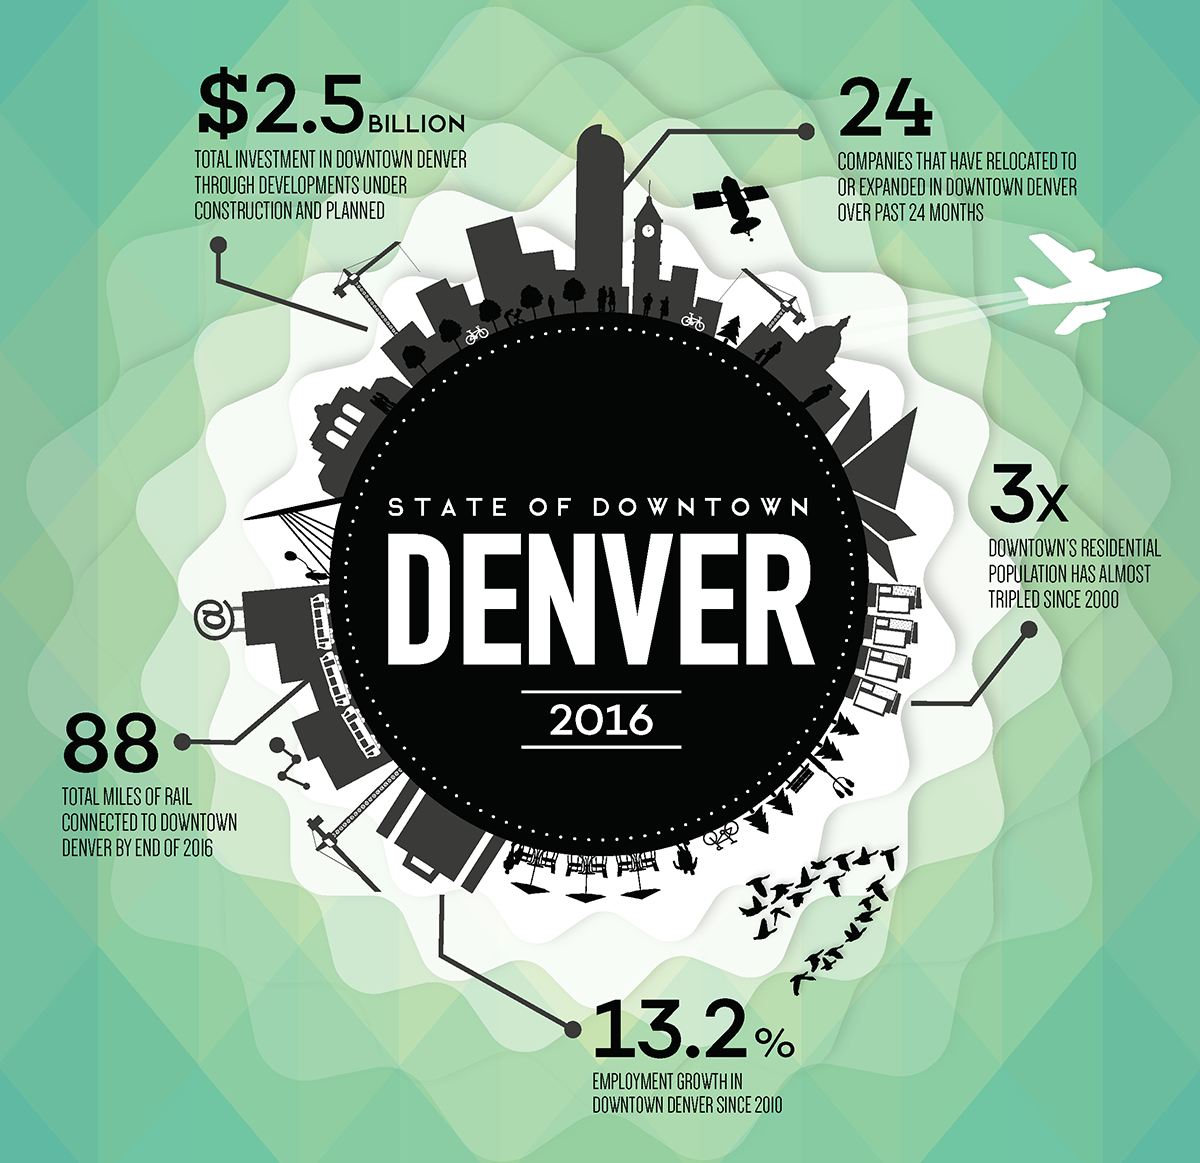 An insightful infographic highlighting key findings from the 2016 State of Downtown Denver Report, presented by the Downtown Denver Partnership.